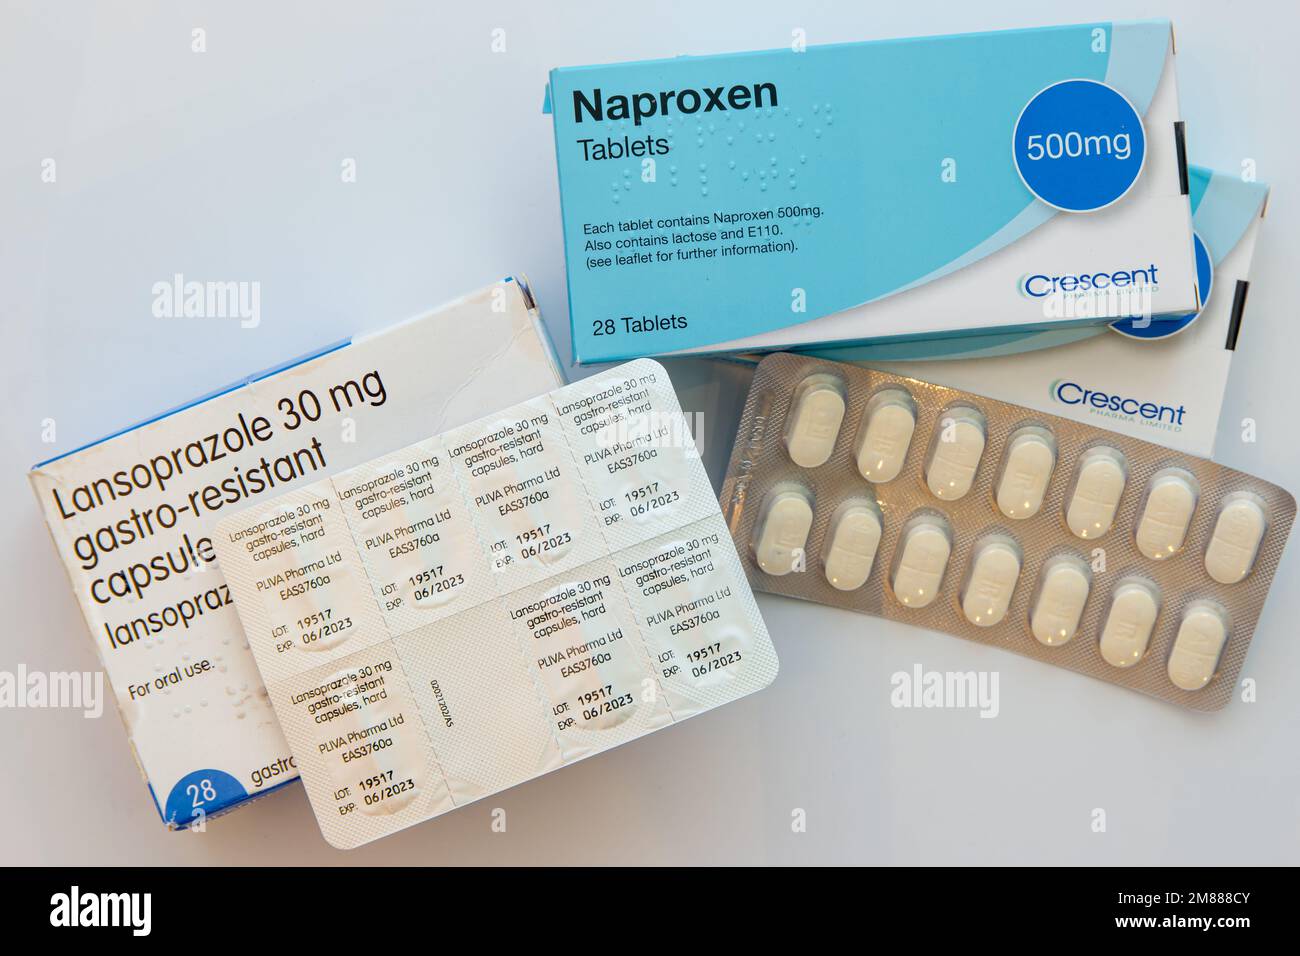 Box and blister pack of generic 500mg Naproxen tablets and 30mg Lansoprazole capsules, often prescribed together Stock Photo